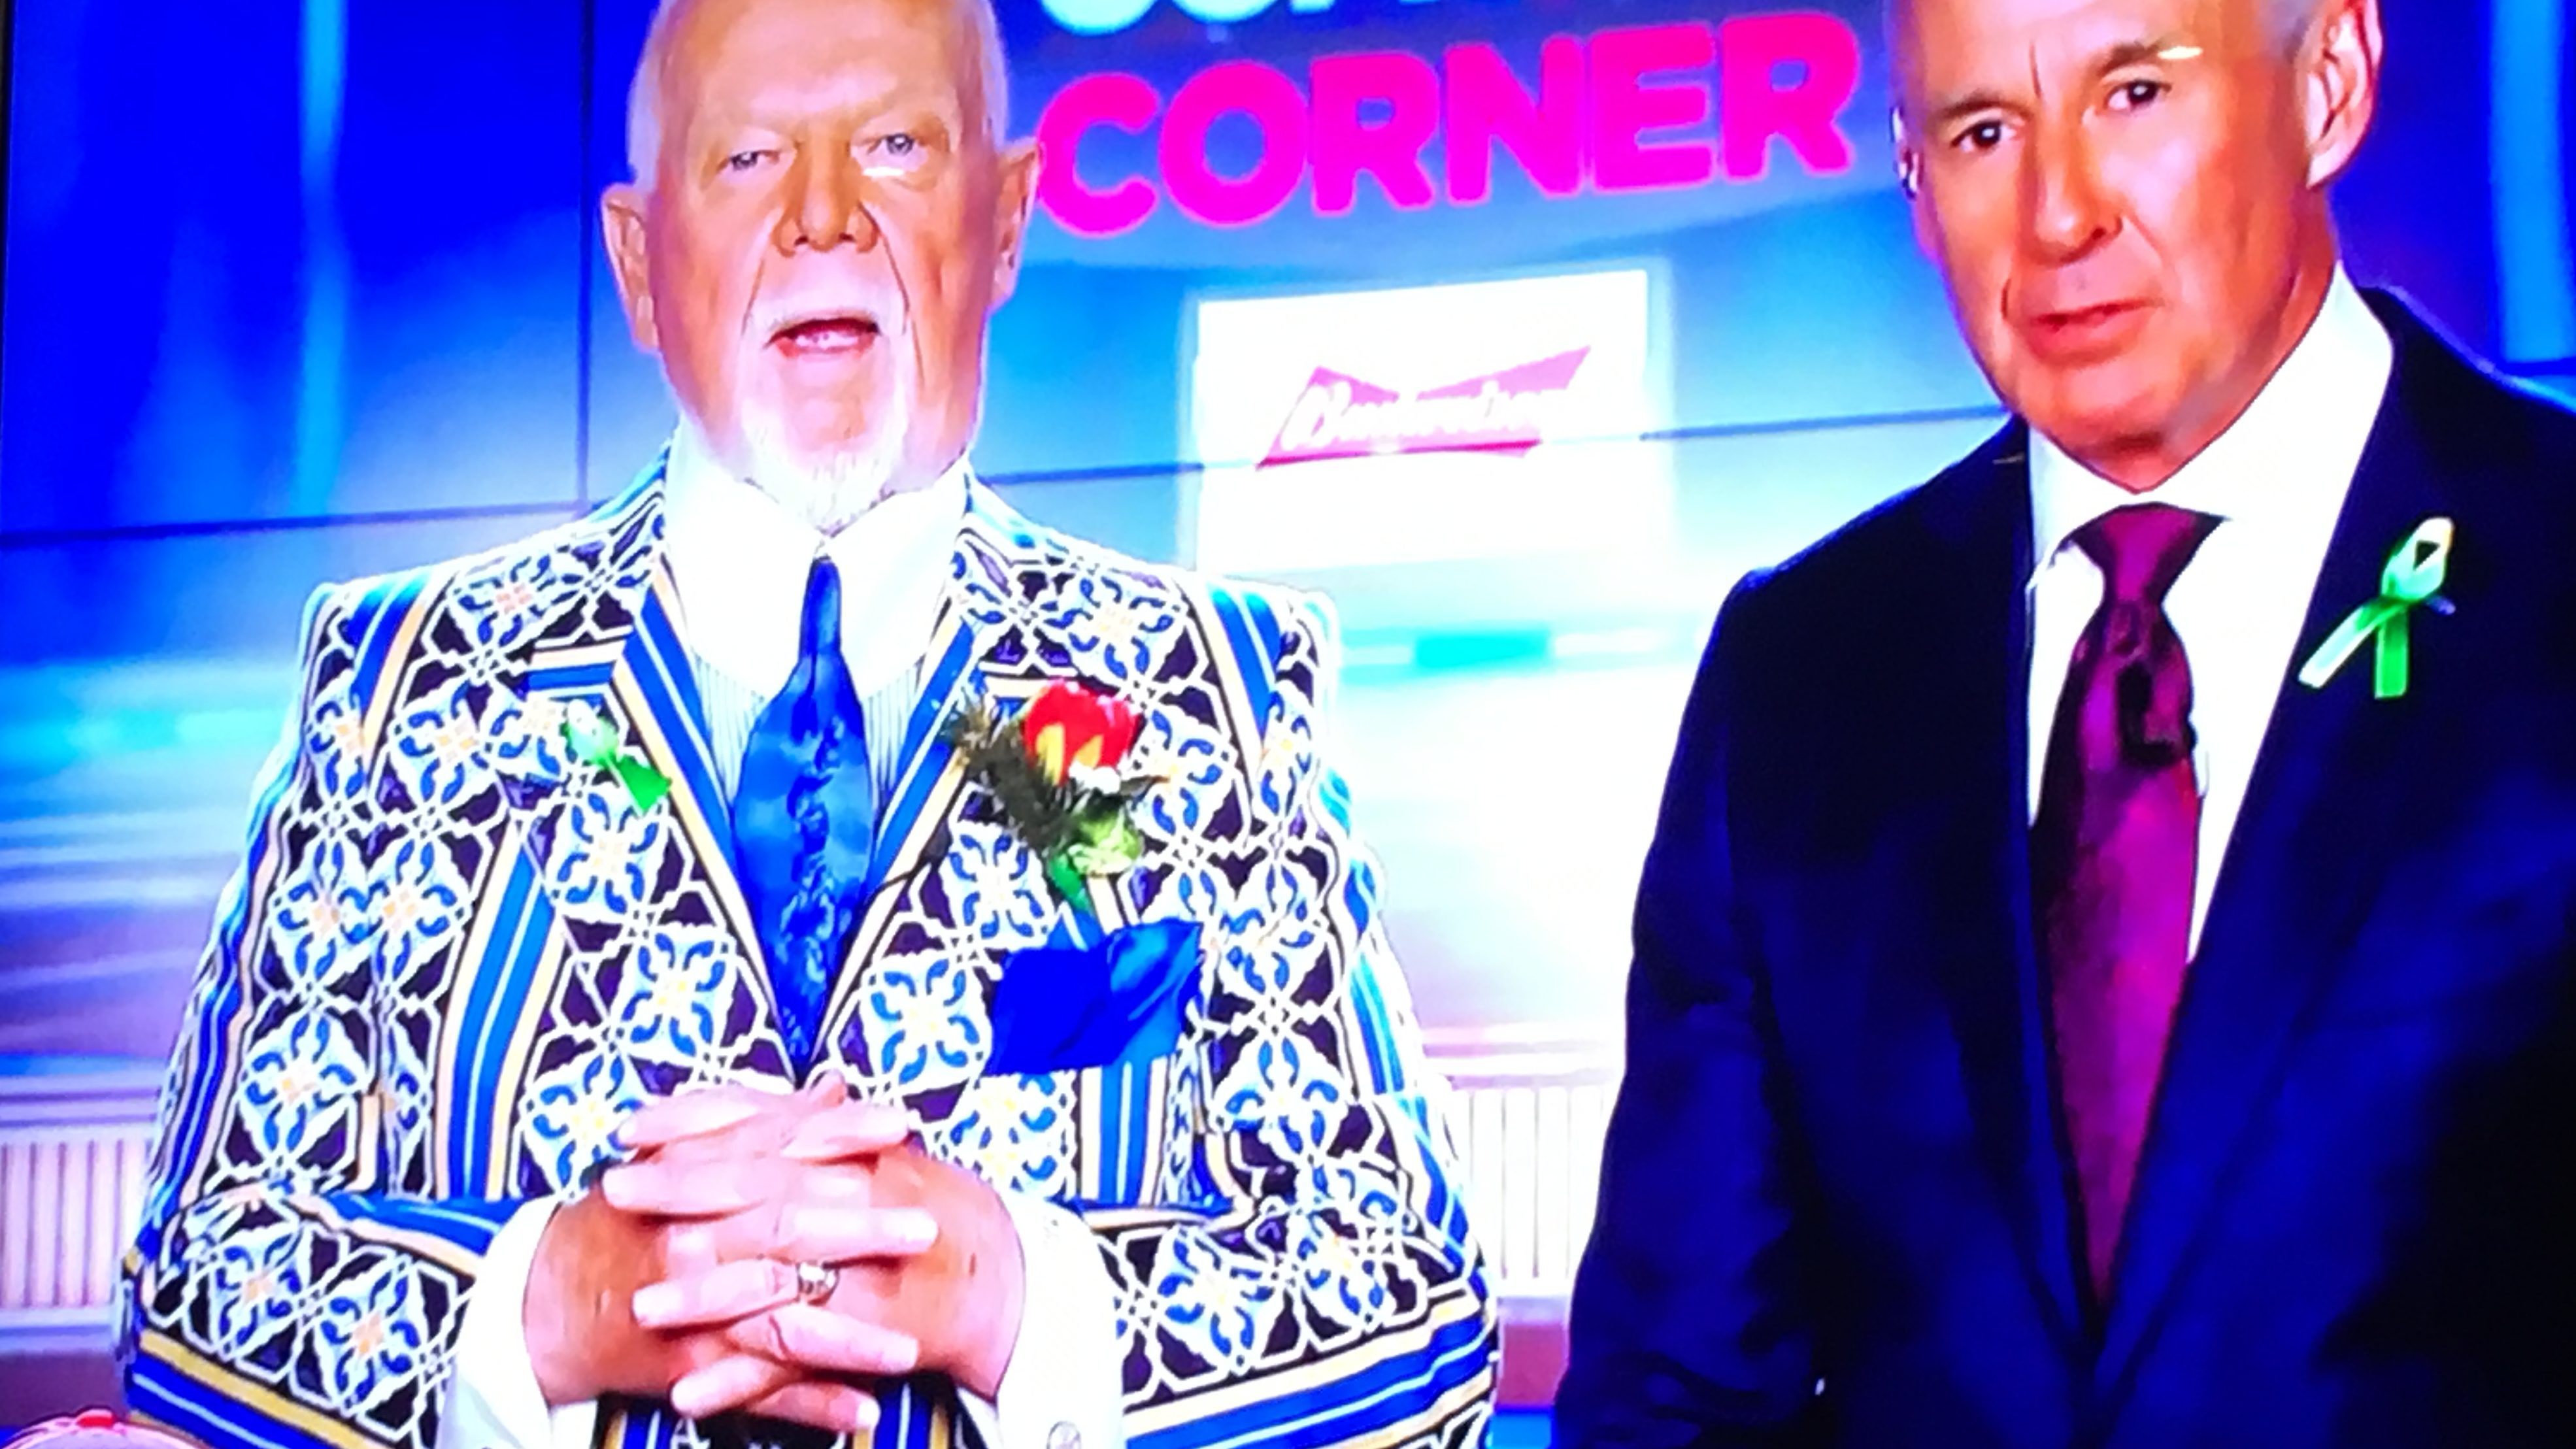 Don Cherry Says Suit is Inspired By Mennonite Floor Patterns